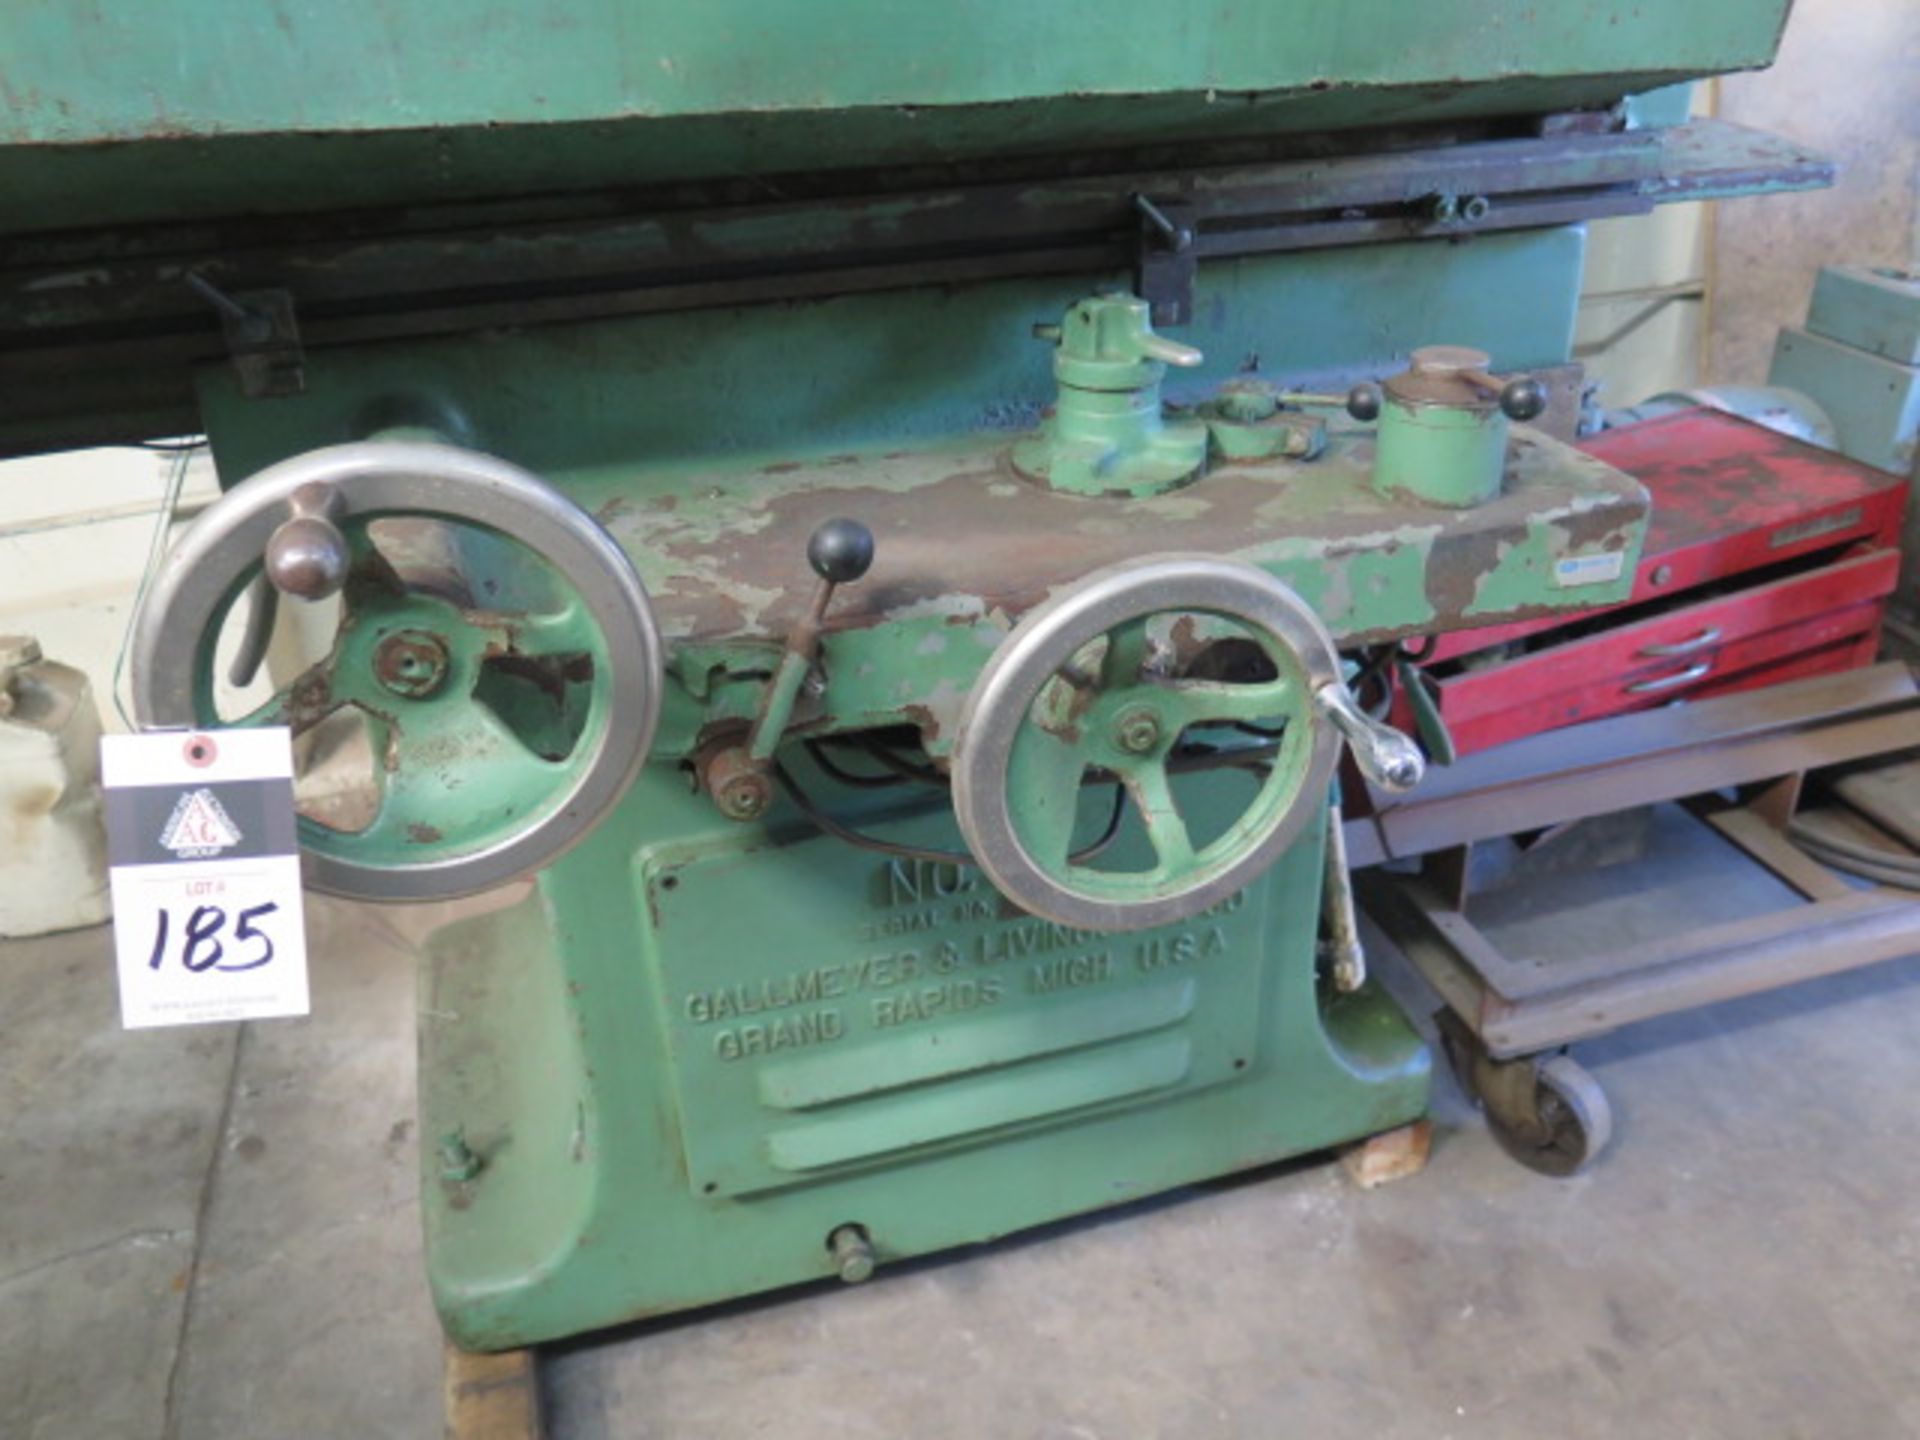 Gallmeyer & Livingston No. 36 10” x 24” Automatic Surface Grinder w/ Electromag Chuck, SOLD AS IS - Image 3 of 8